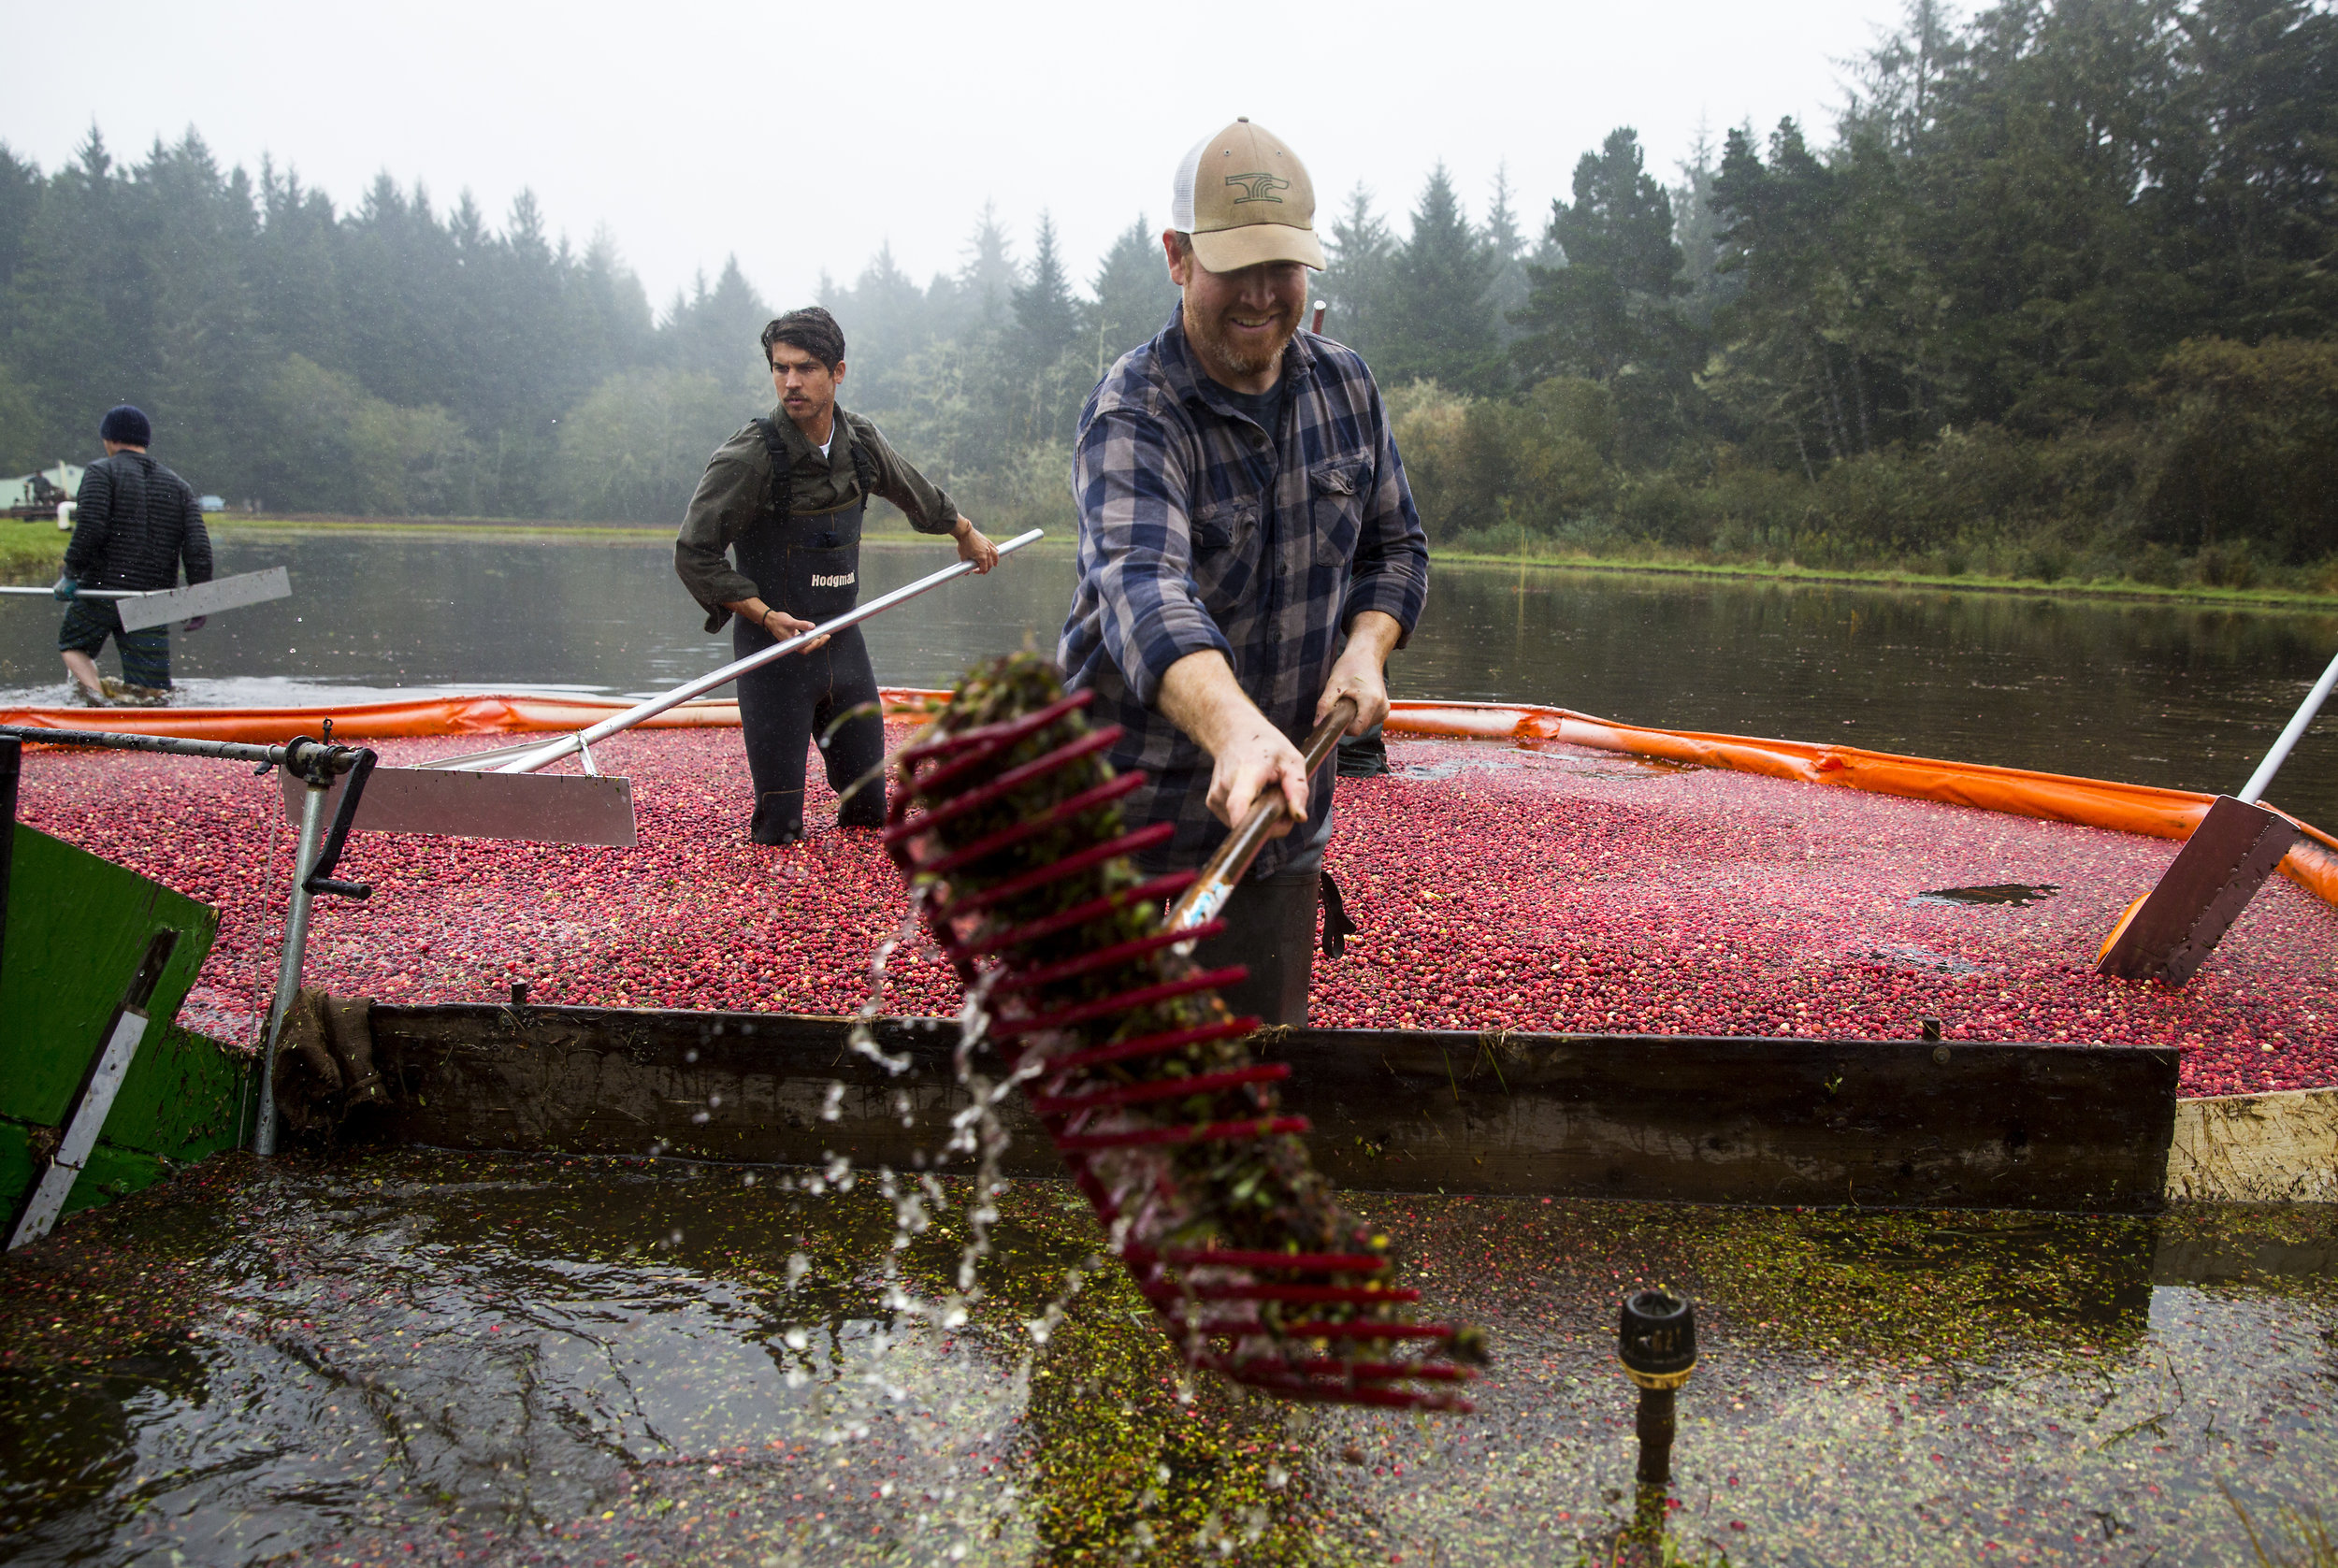  Brady Turner, co-owner of the local restaurant Pickled Fish, uses a rake to scoop plant debris from the floating cranberries during the annual harvest at Starvation Alley Farms. Turner's restaurant utilizes the farms cranberries and some of their co